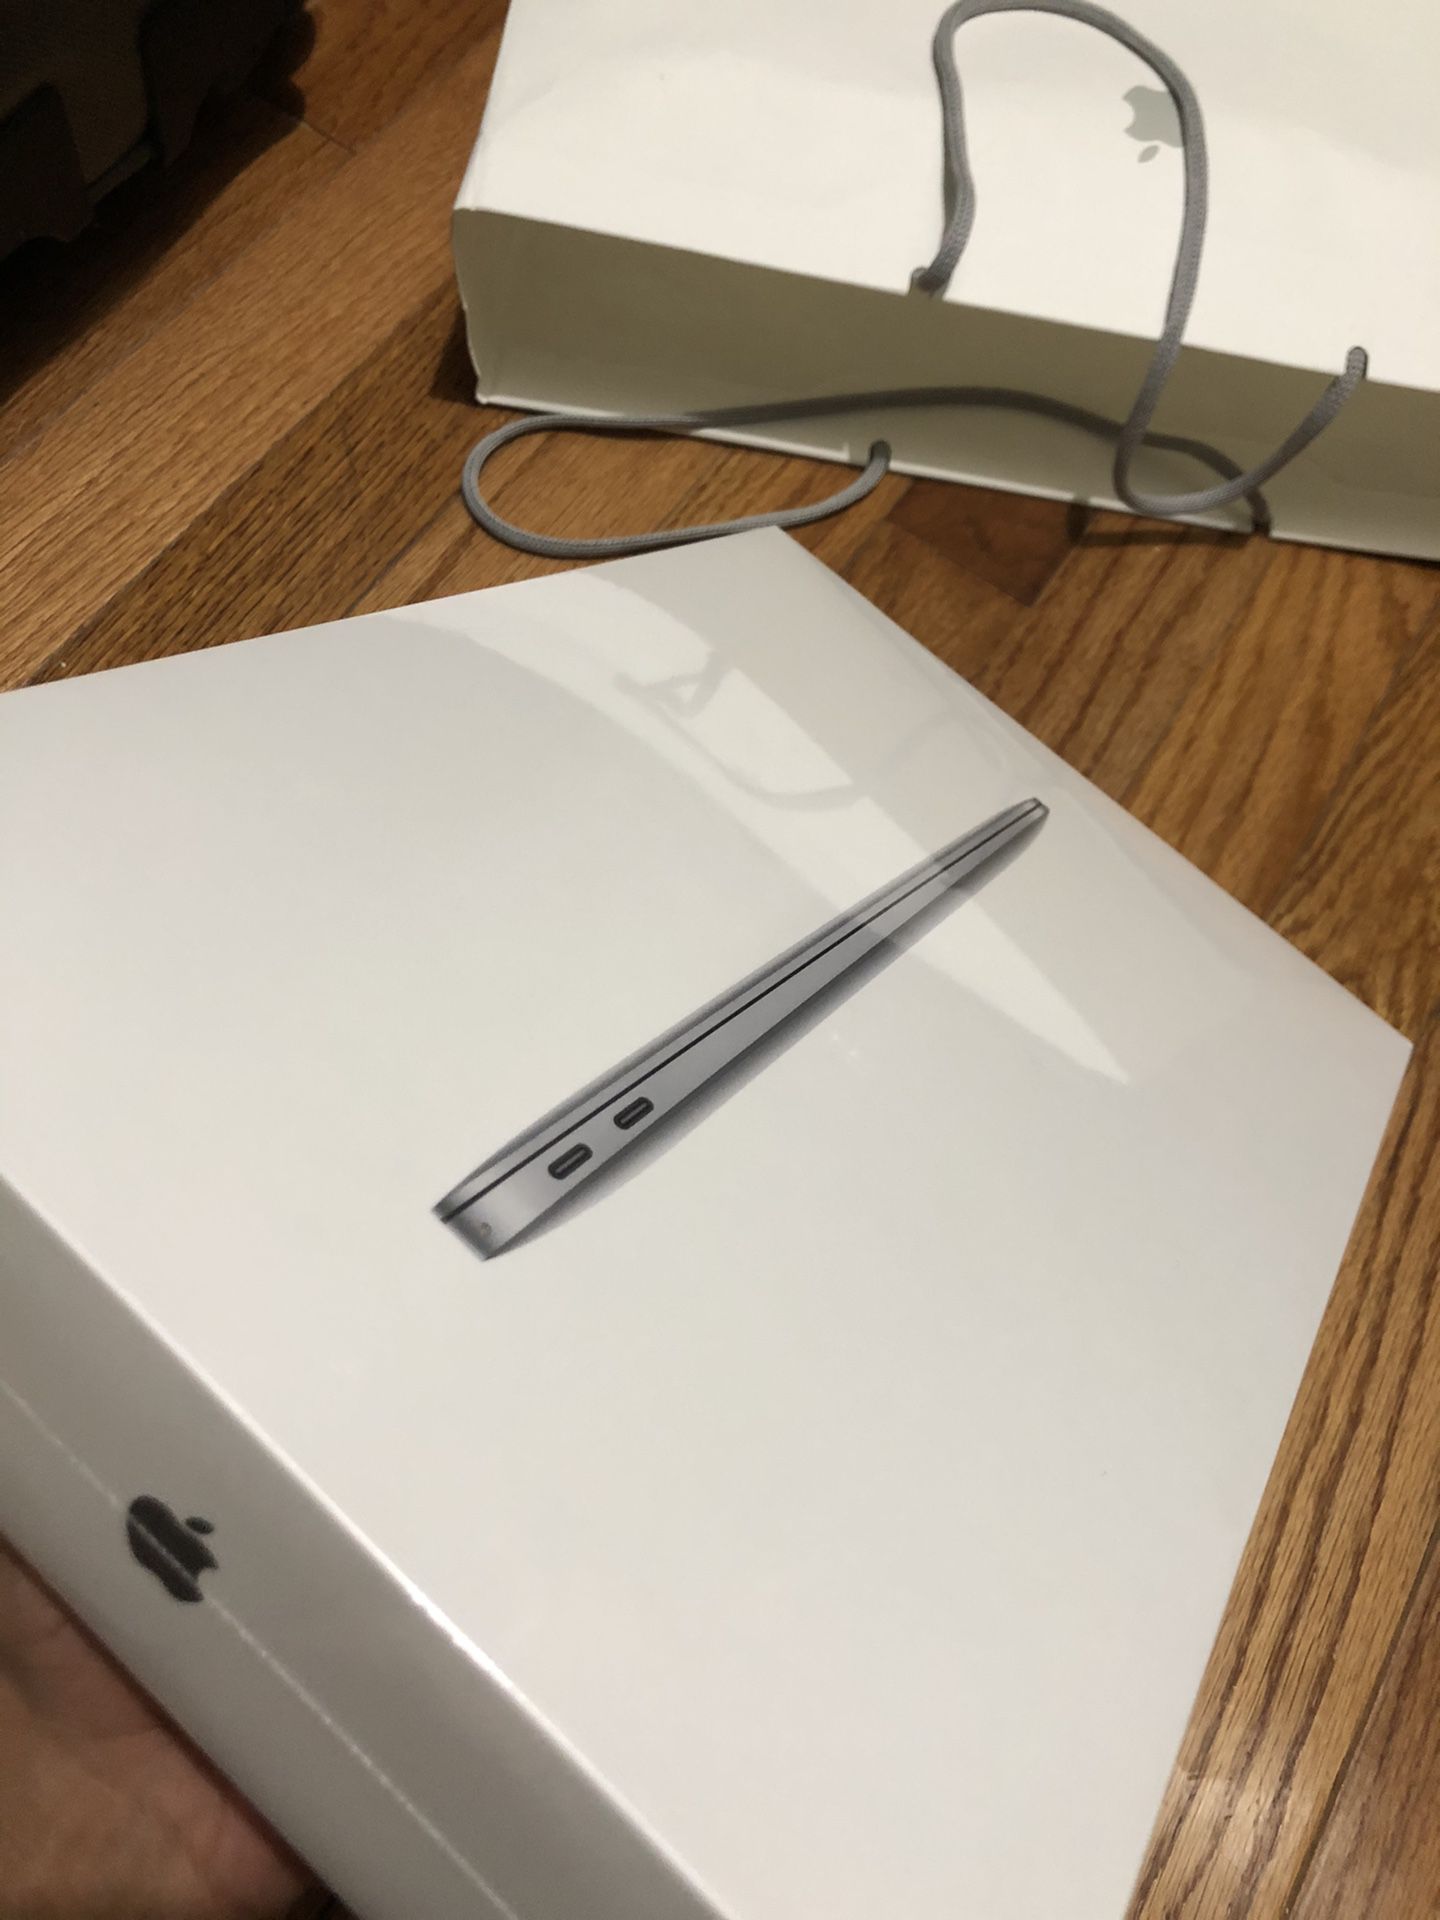 Brand New 2019 Macbook Air with 1 year Applecare